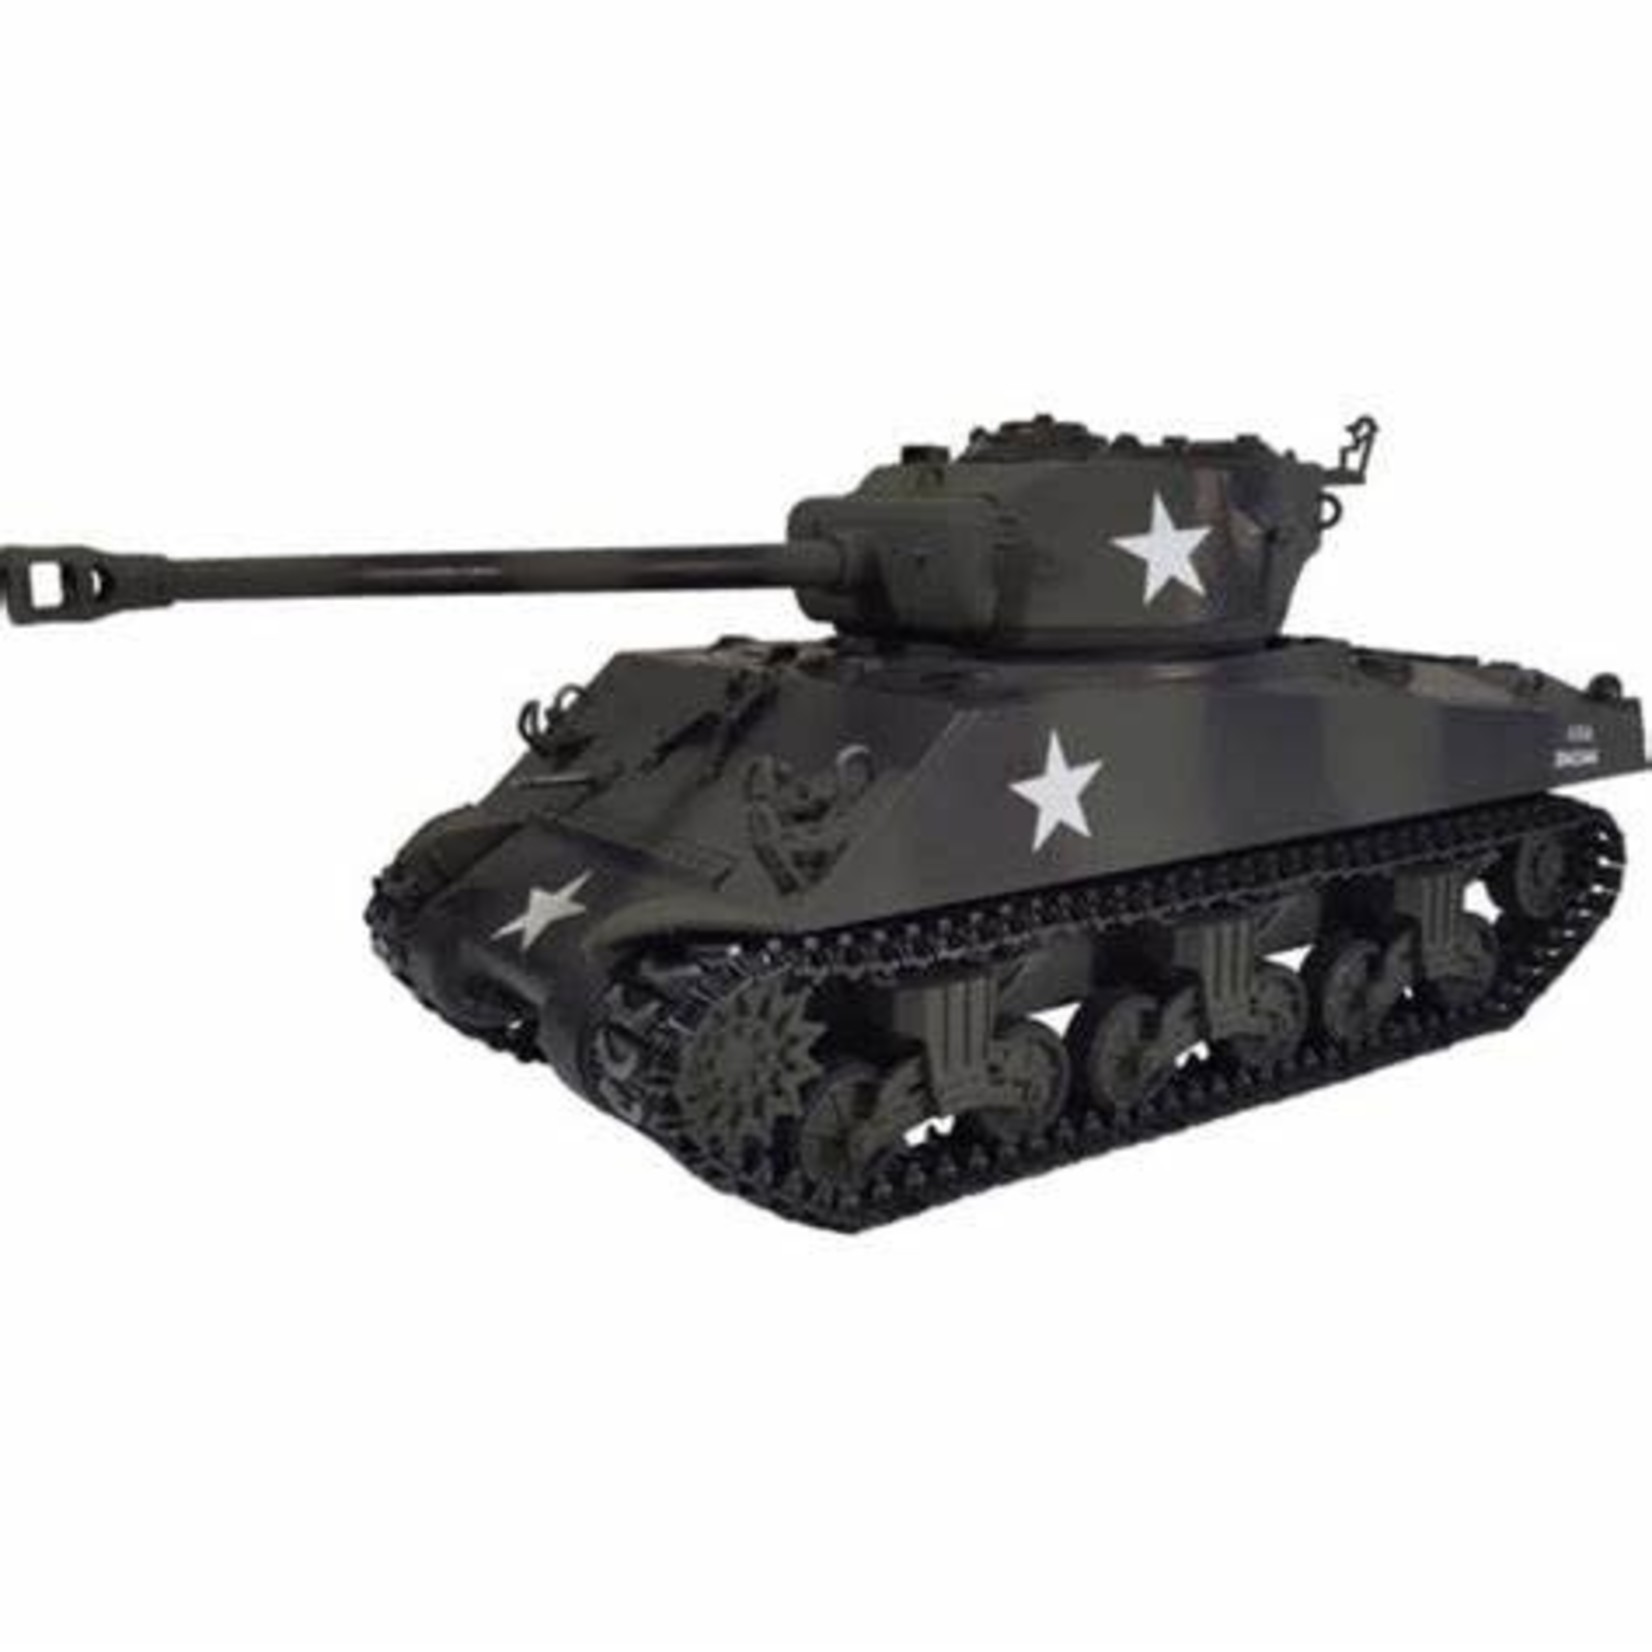 Taigen Tanks Sherman M4A3 76mm (Metal Edition) Airsoft 2.4GHz RTR RC Tank 1/16th Scale